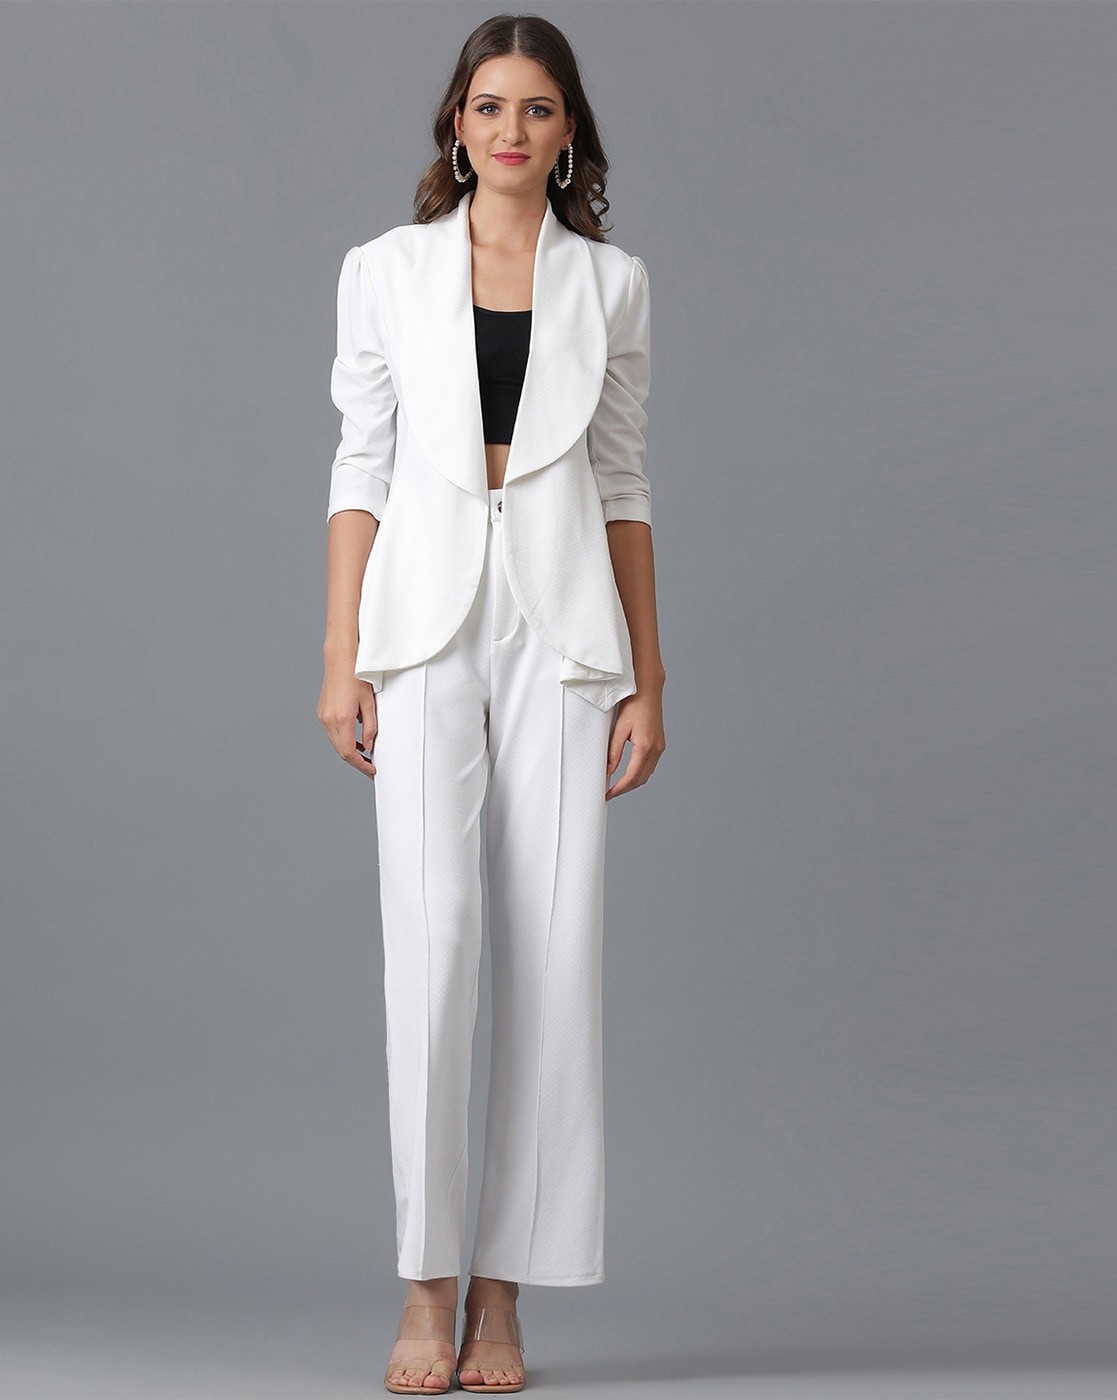 White 3-piece Pants Suits, Formal Suits With Blazer, Waistcoat and Pants,  Wedding Suits, White Pants Suits - Etsy